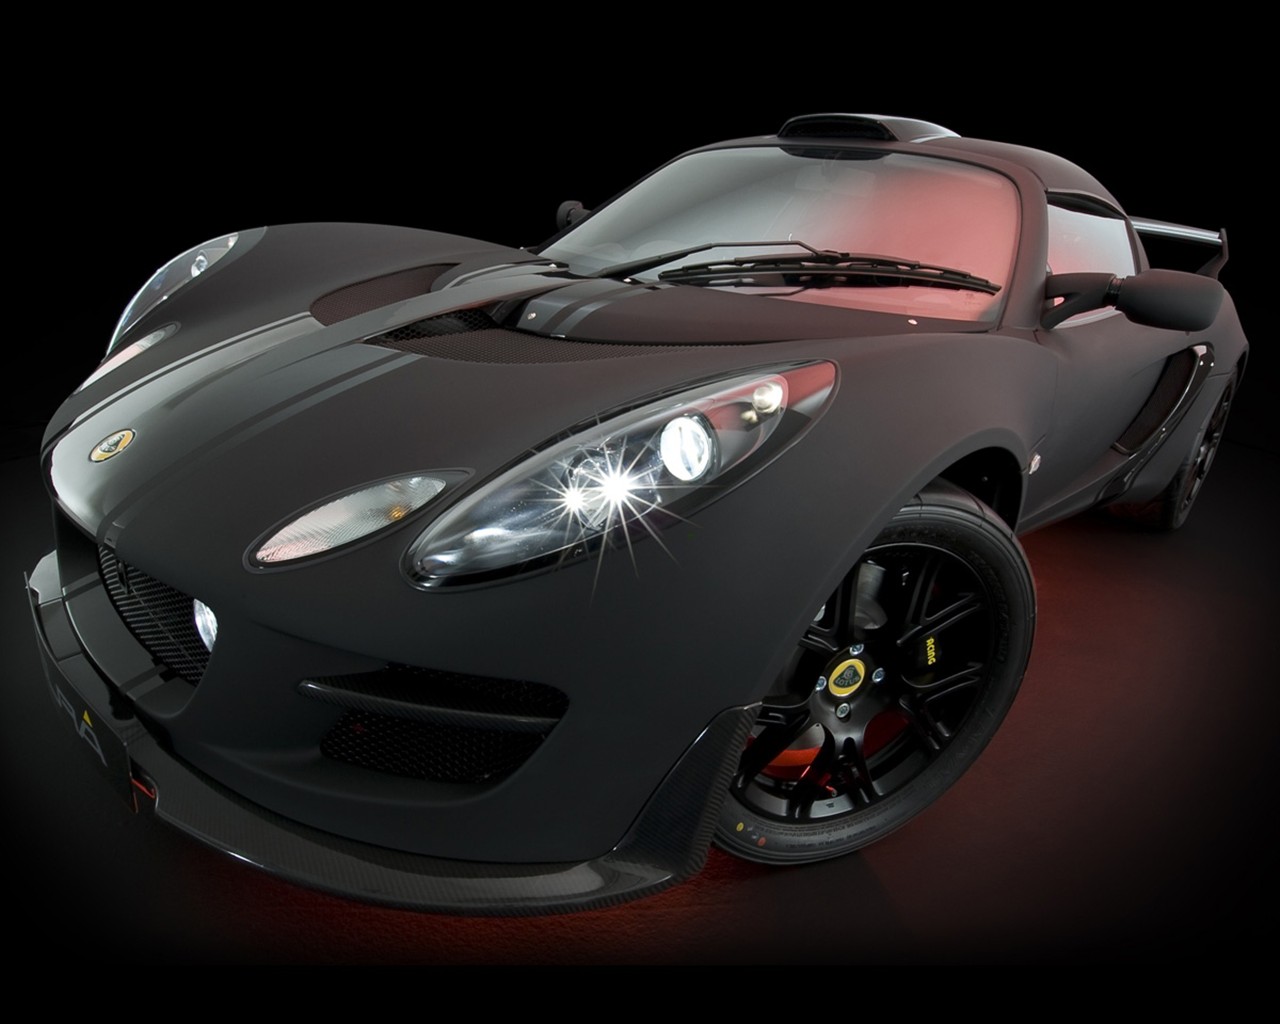 2010 Lotus limited edition sports car wallpaper #5 - 1280x1024